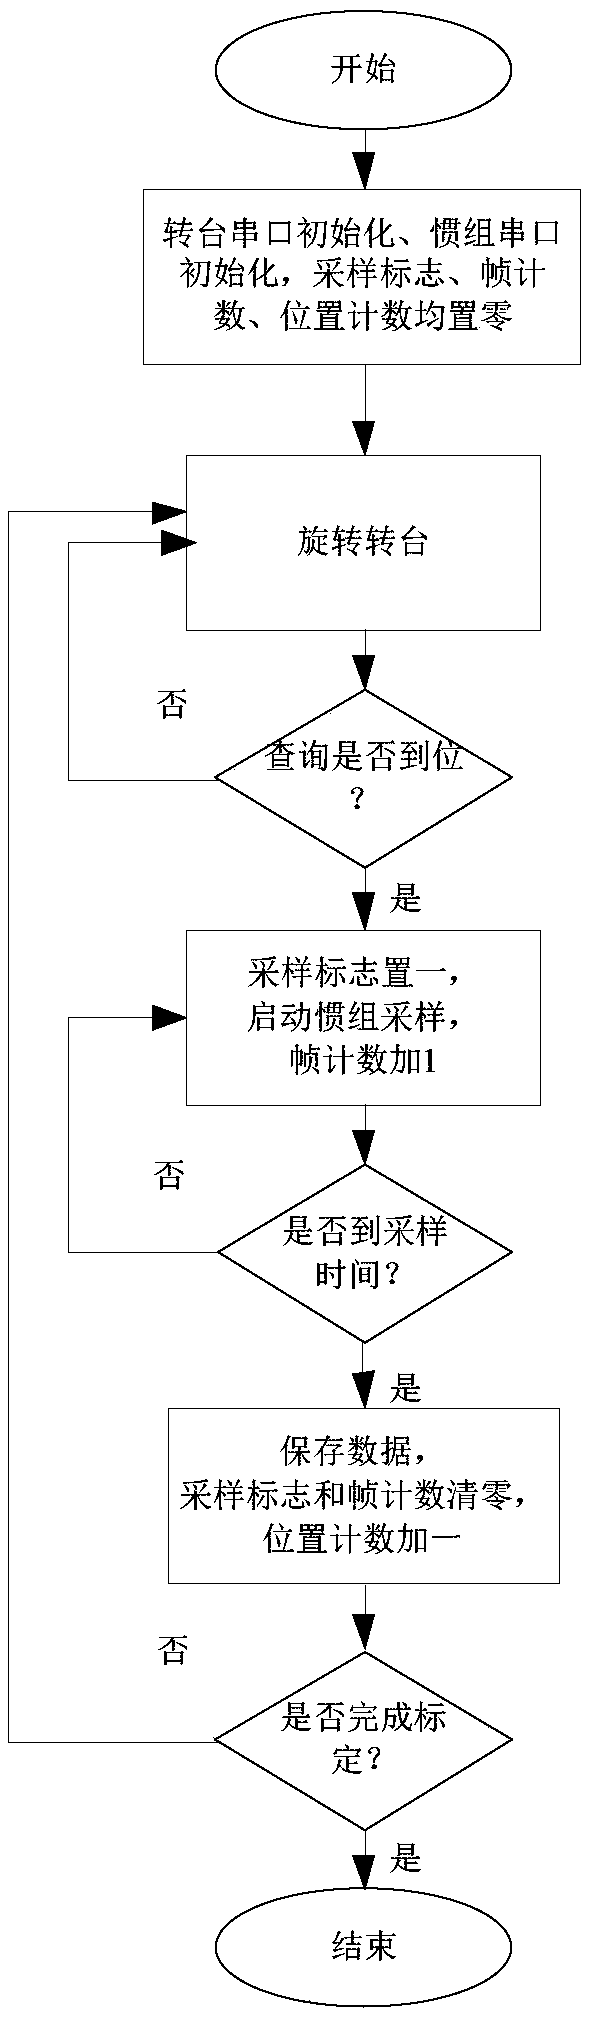 Pipeline positioning method and system based on inertial navigation system and speedometer